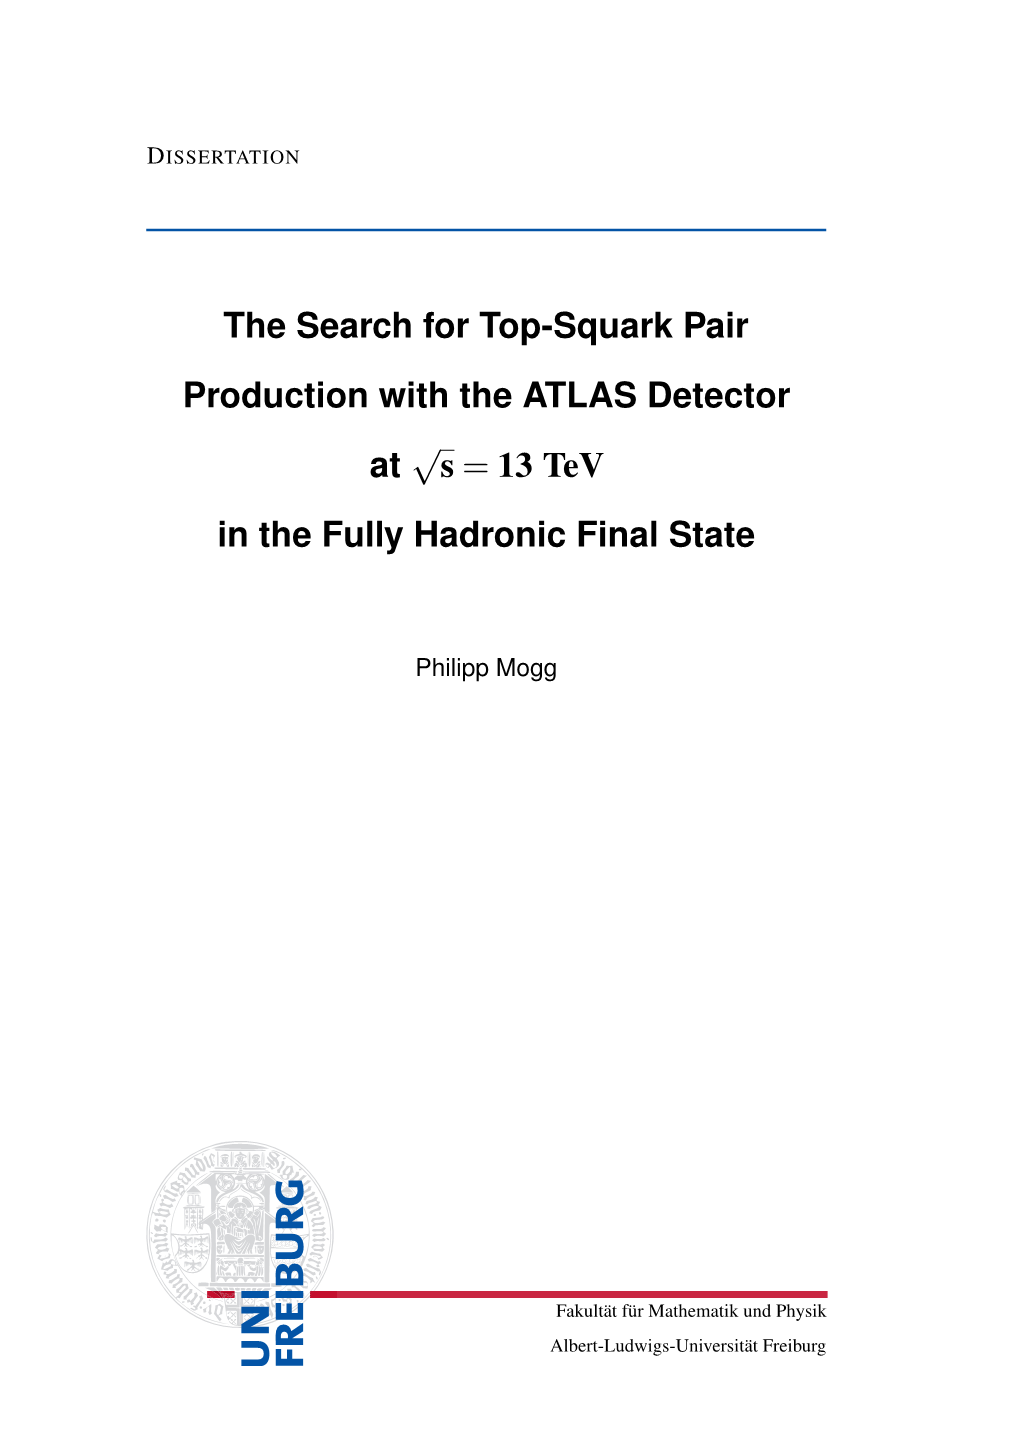 The Search for Top-Squark Pair Production with the ATLAS Detector